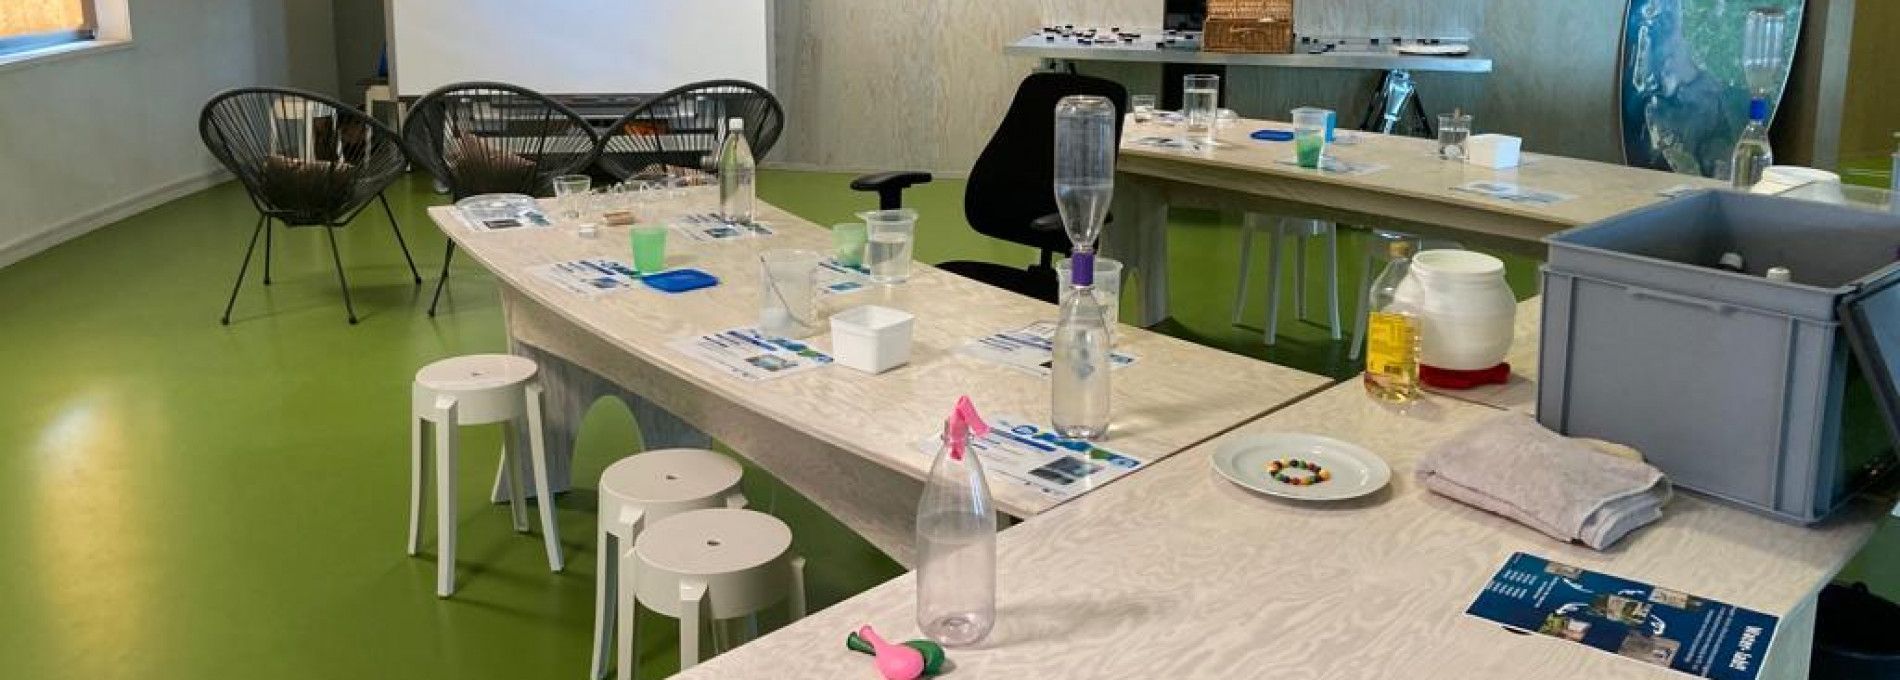 Energy and Water Lab in the Nature Centre - Tourist Information 